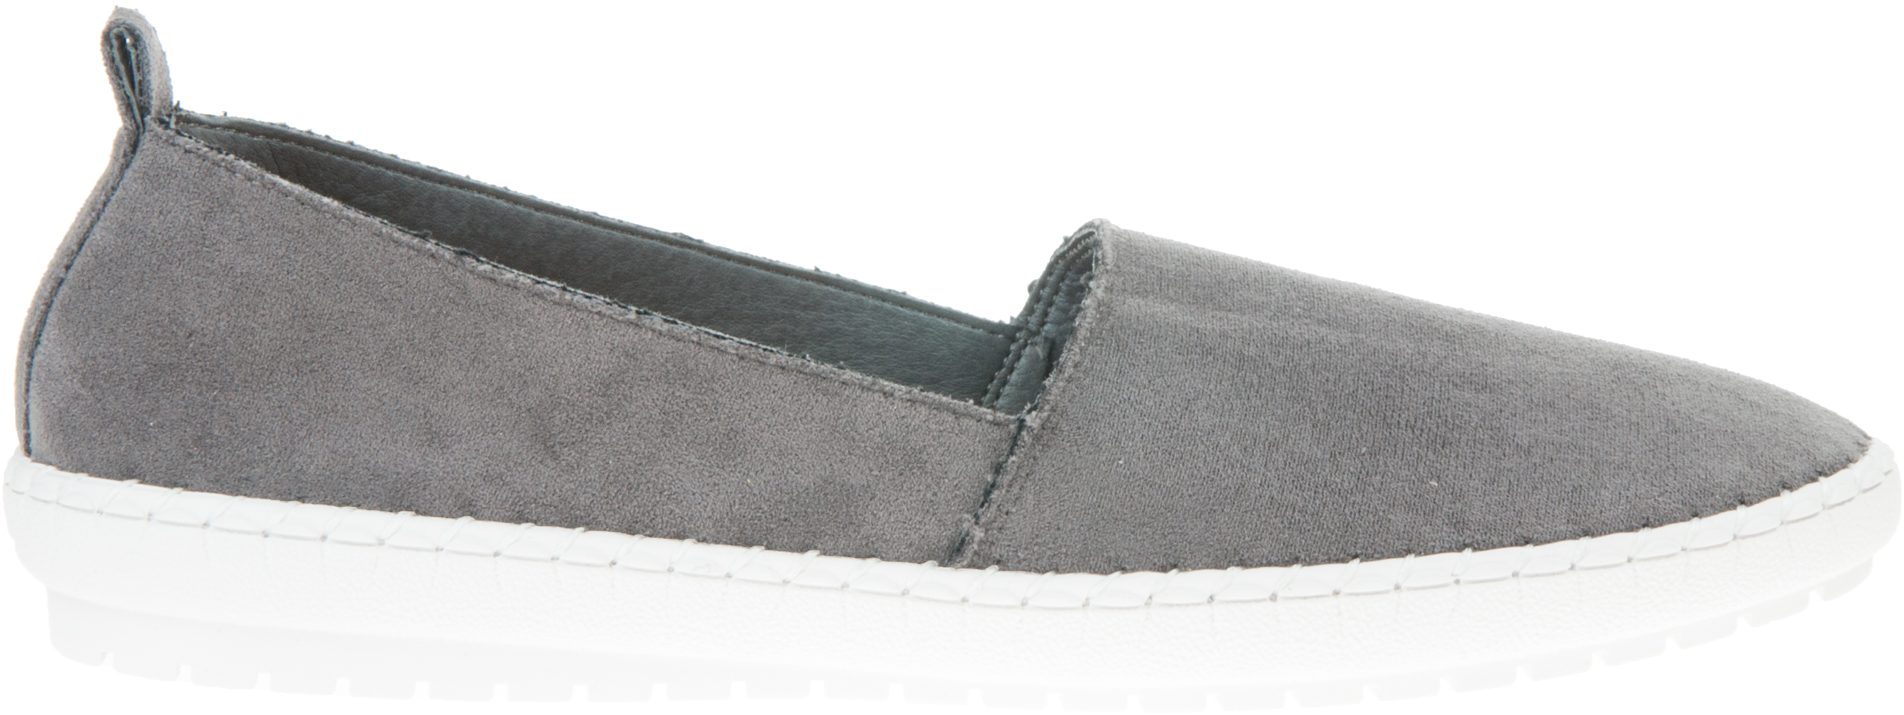 Lunar Bliss II Grey JLY196 GR - Everyday Shoes - Humphries Shoes